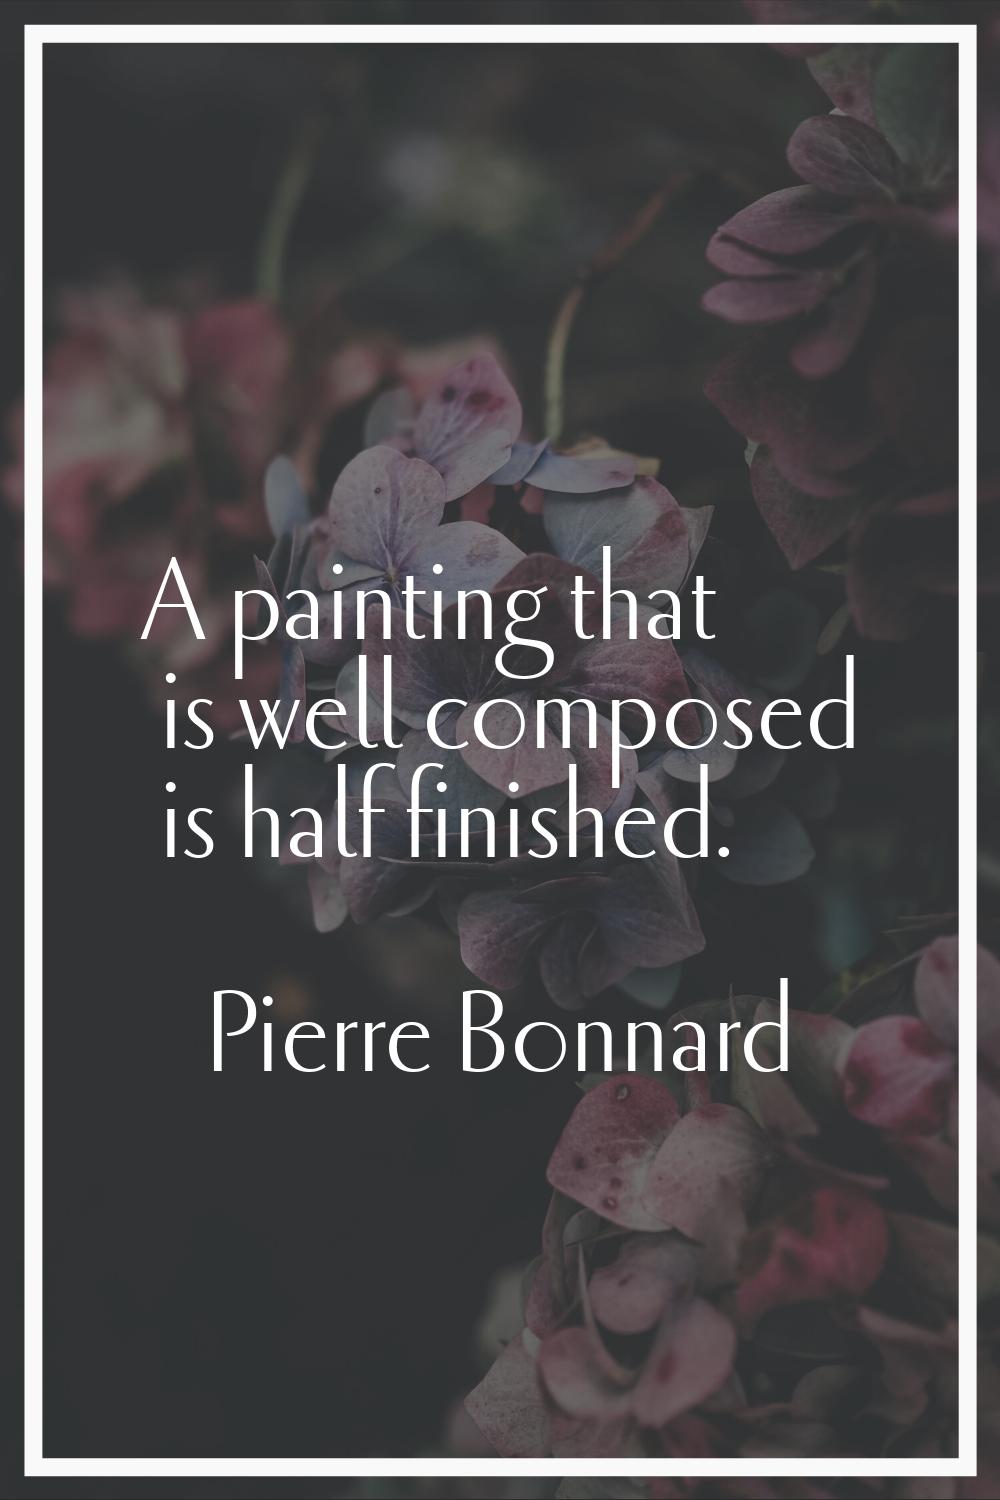 A painting that is well composed is half finished.